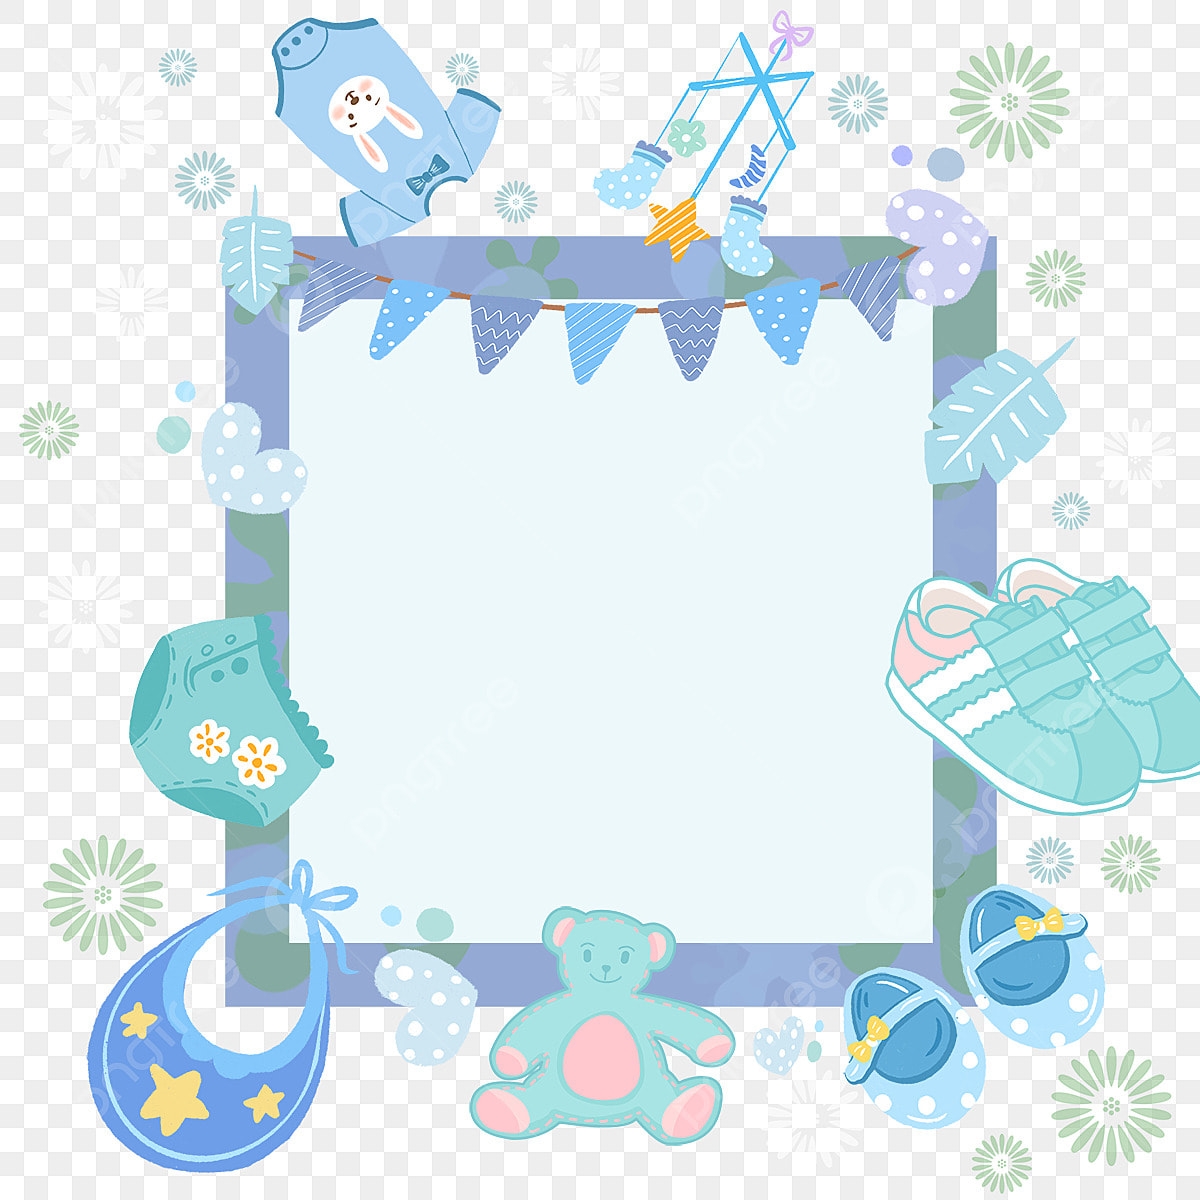 Baby Boy Border PNG Transparent Images Free Download Vector Files Pngtree - Free Printable Baby Borders For Paper